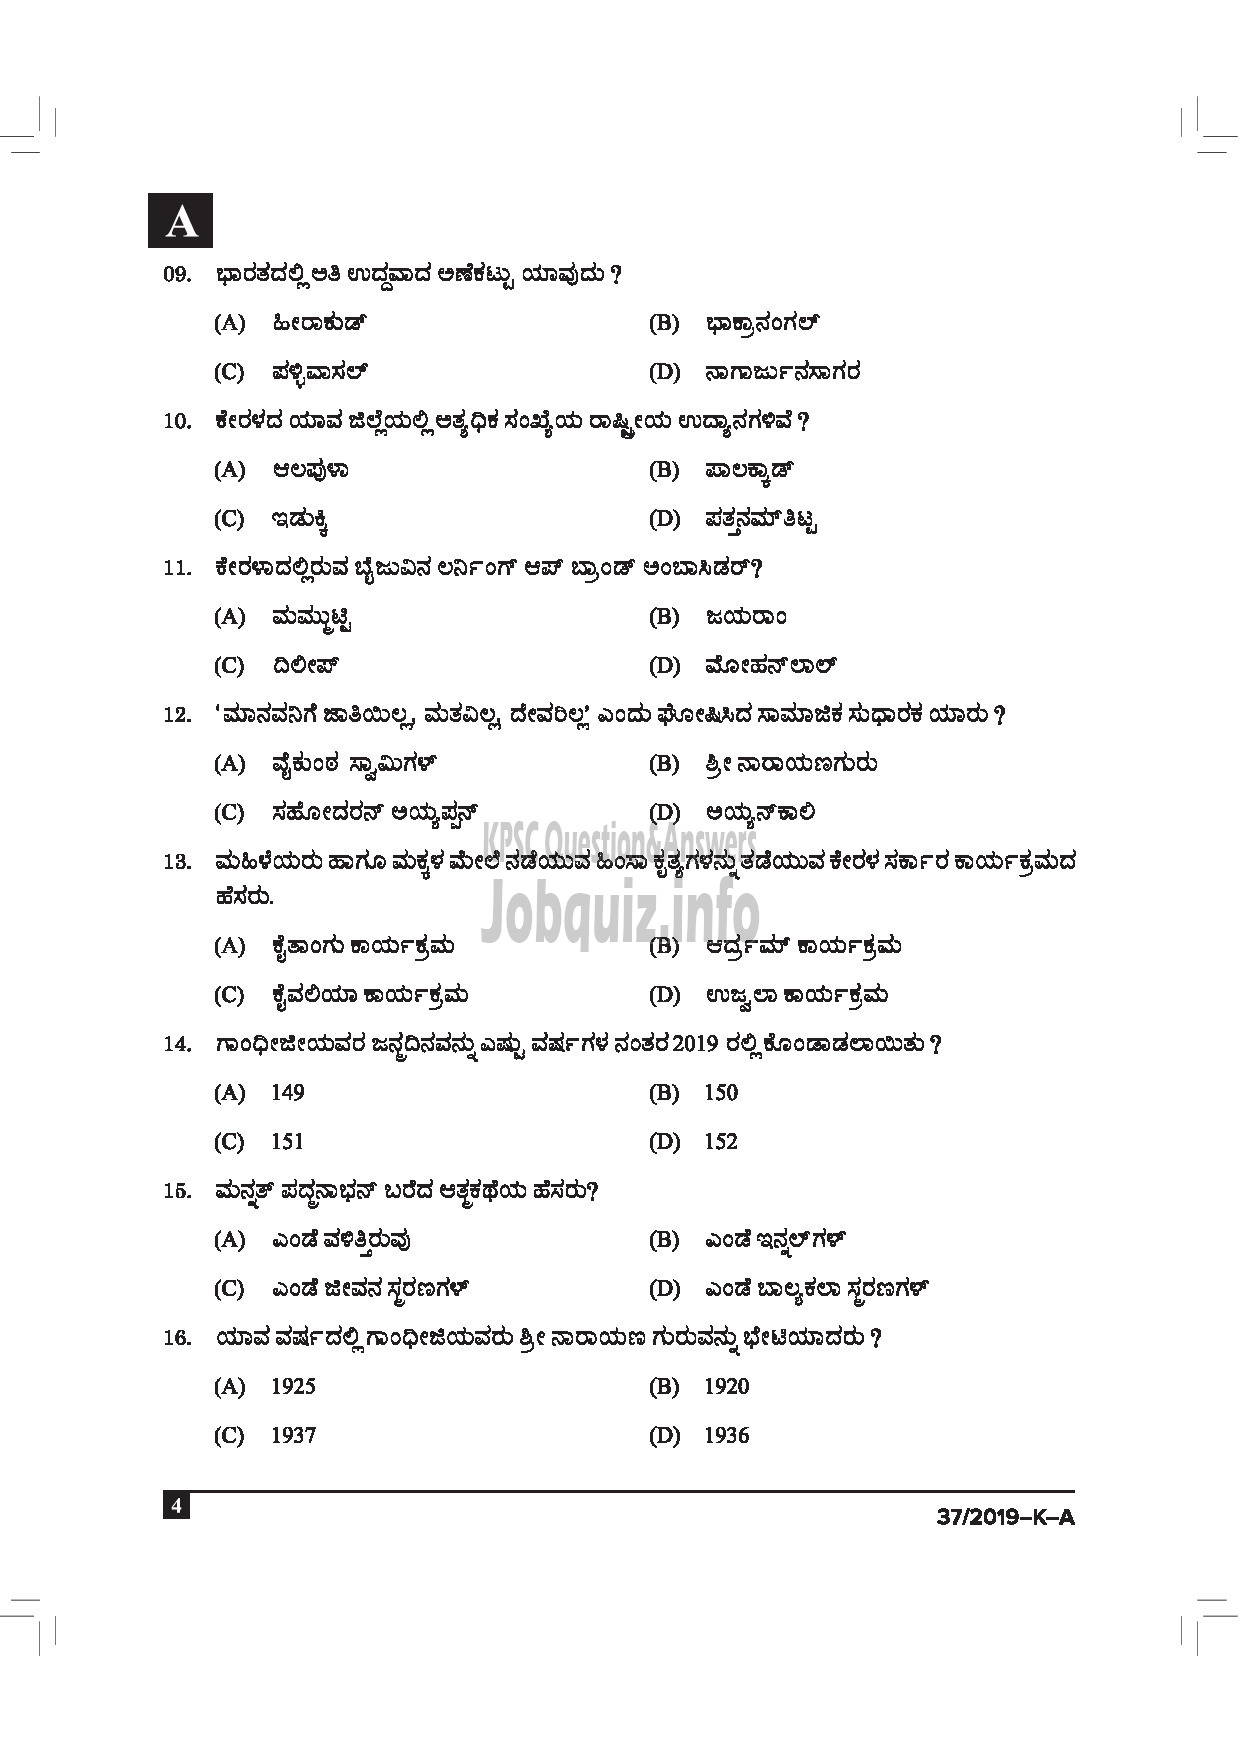 Kerala PSC Question Paper - DRIVER CUM OFFICE ATTENDANT / POLICE CONSTABLE DRIVER GOVT OWNED COMP / CORP / BOARD / POLICE KANNADA -4